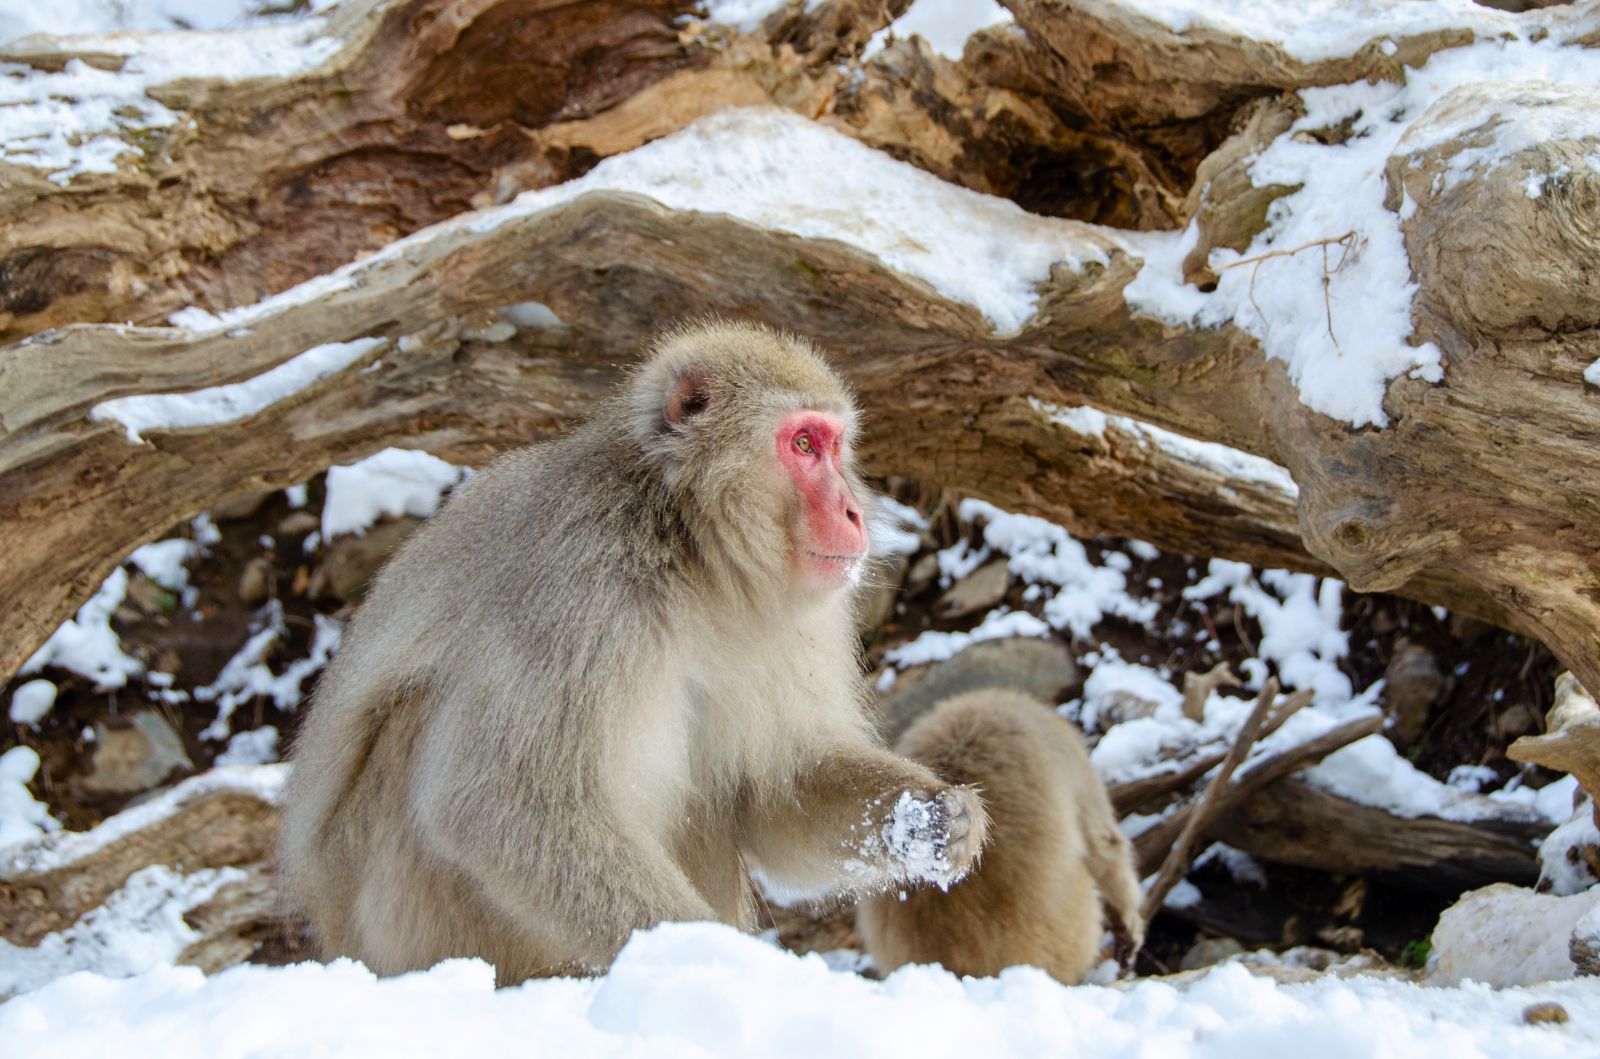 A monkey in the snow in Japan